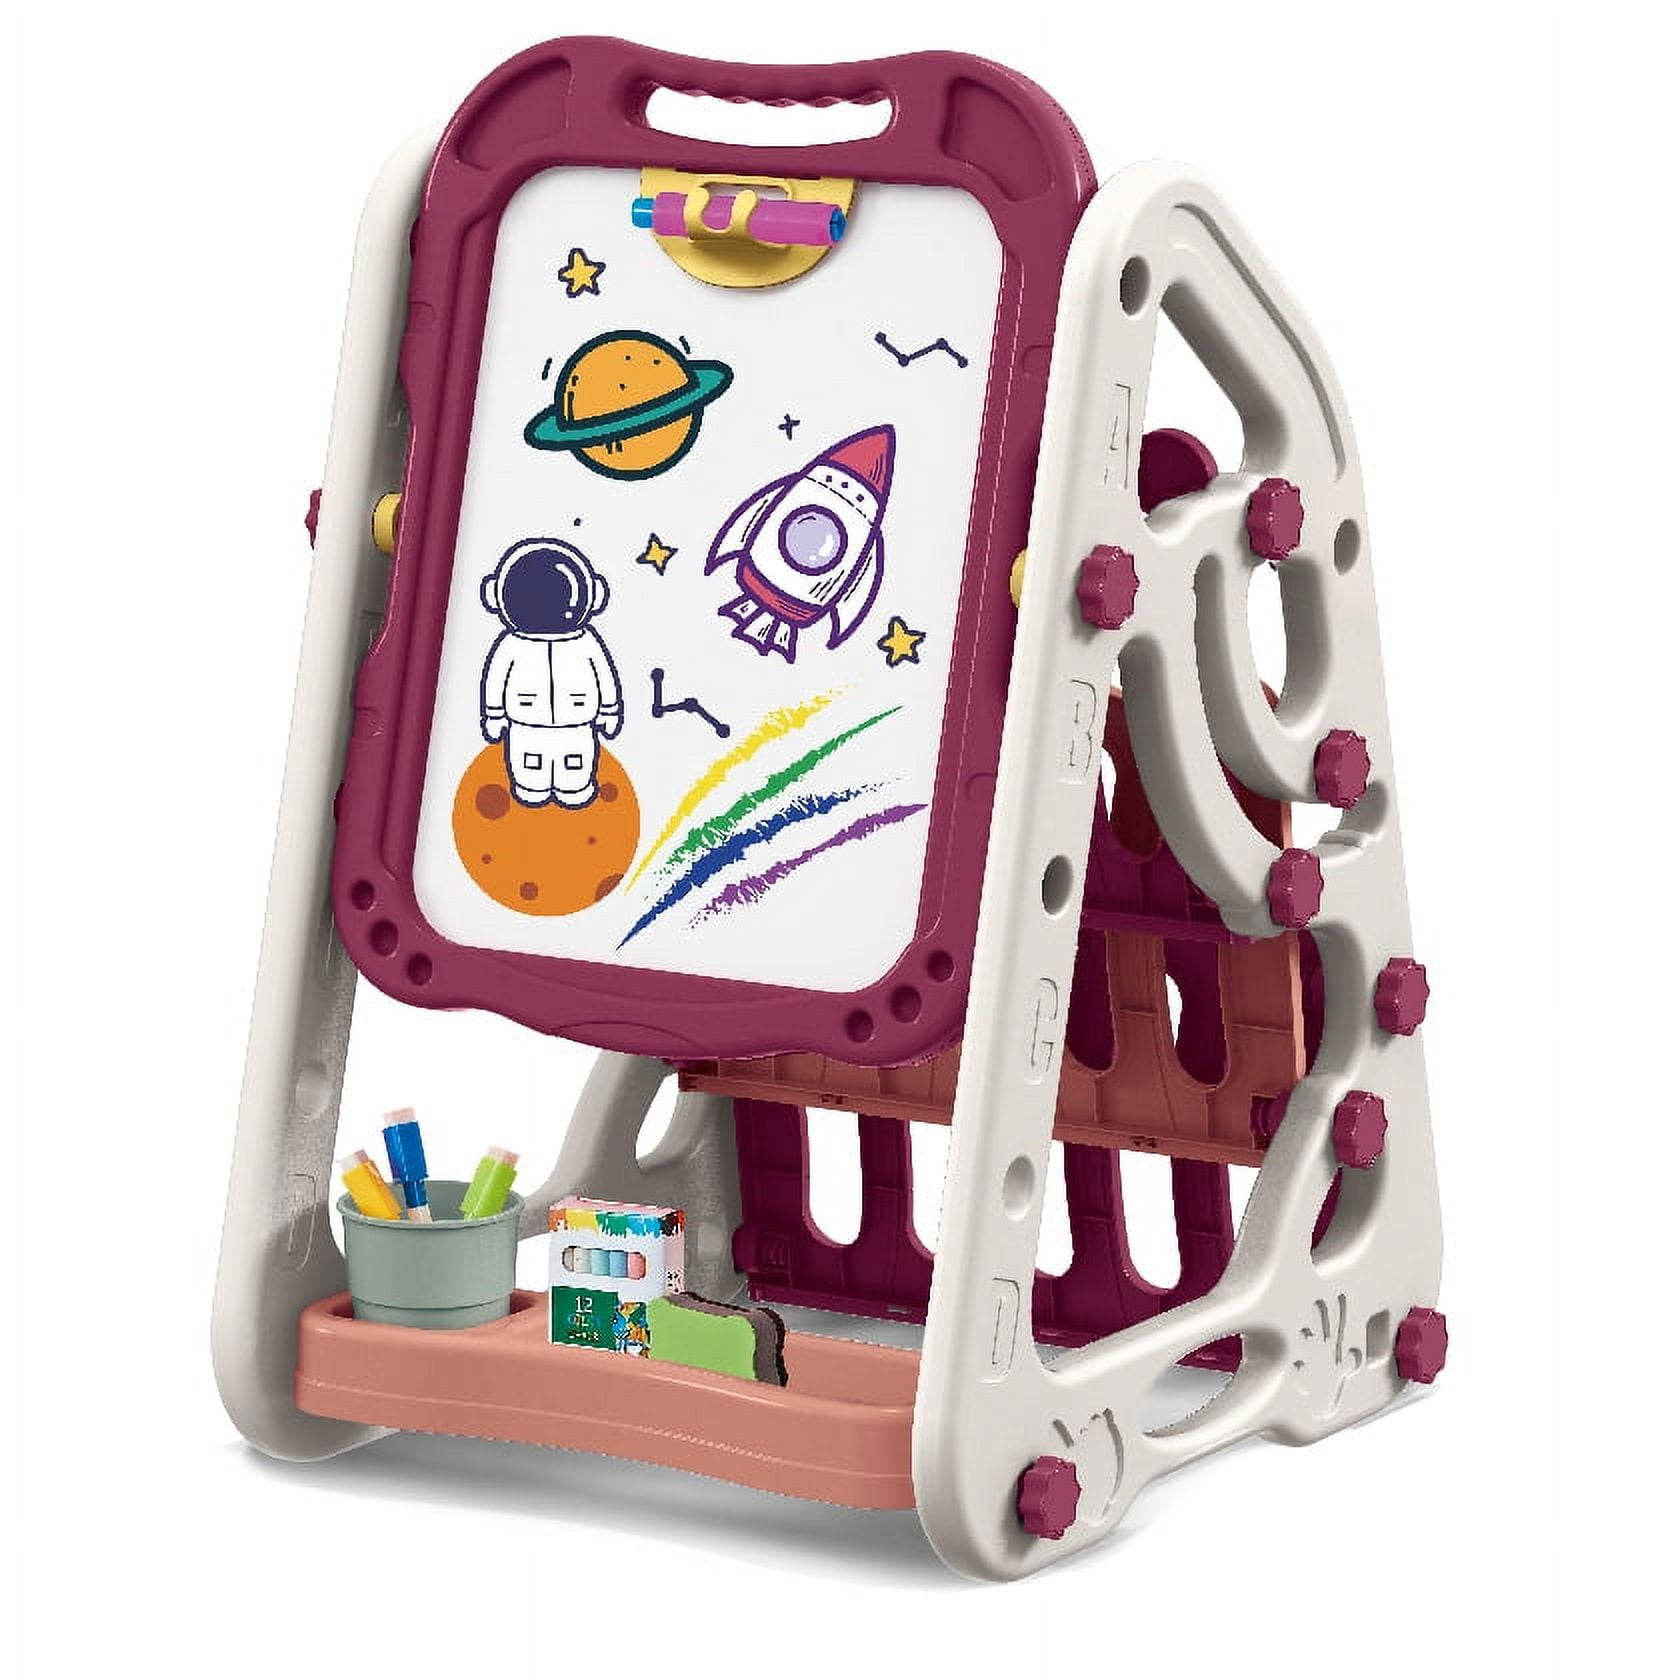 All-In-1 Easel Ds - PlayMatters Toys